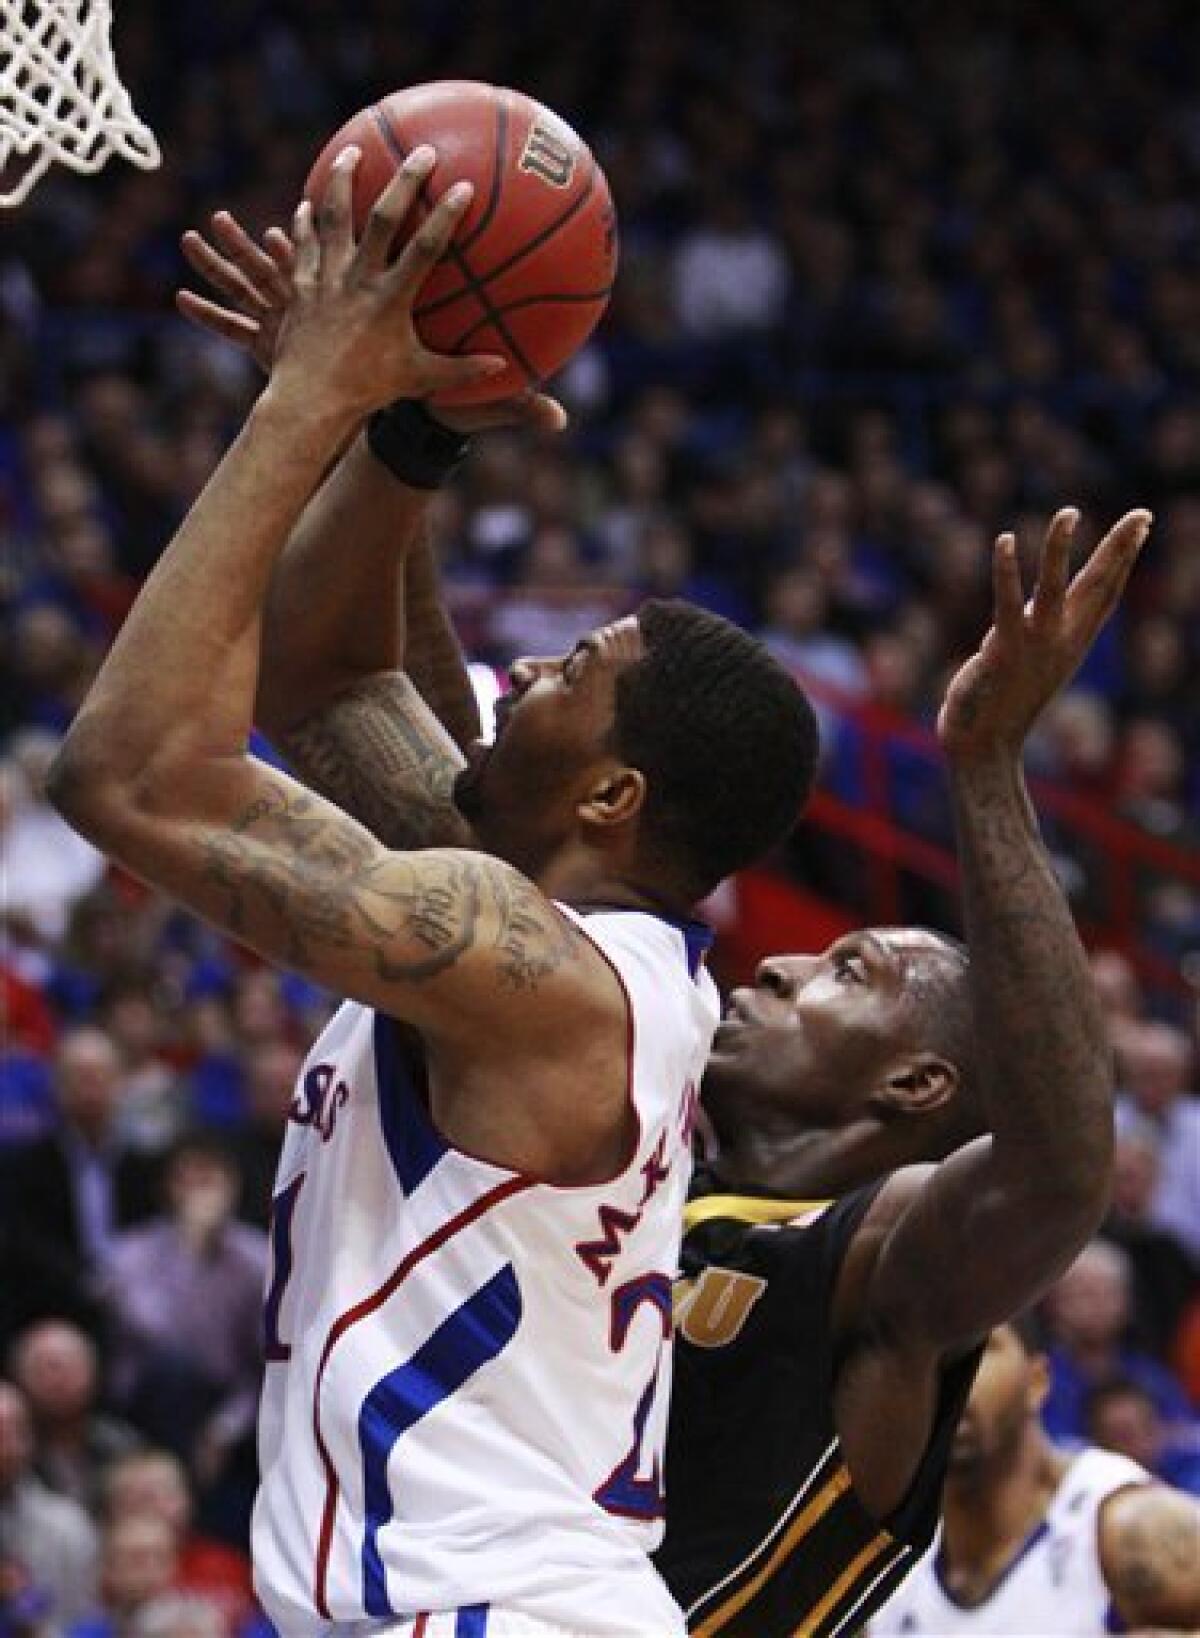 Kansas' Markieff Morris (21) with his twin brother Marcus Morris, left,  during the second half of an NCAA college basketball game against La Salle  Saturday, Dec. 12, 2009 in Kansas City, Mo. (